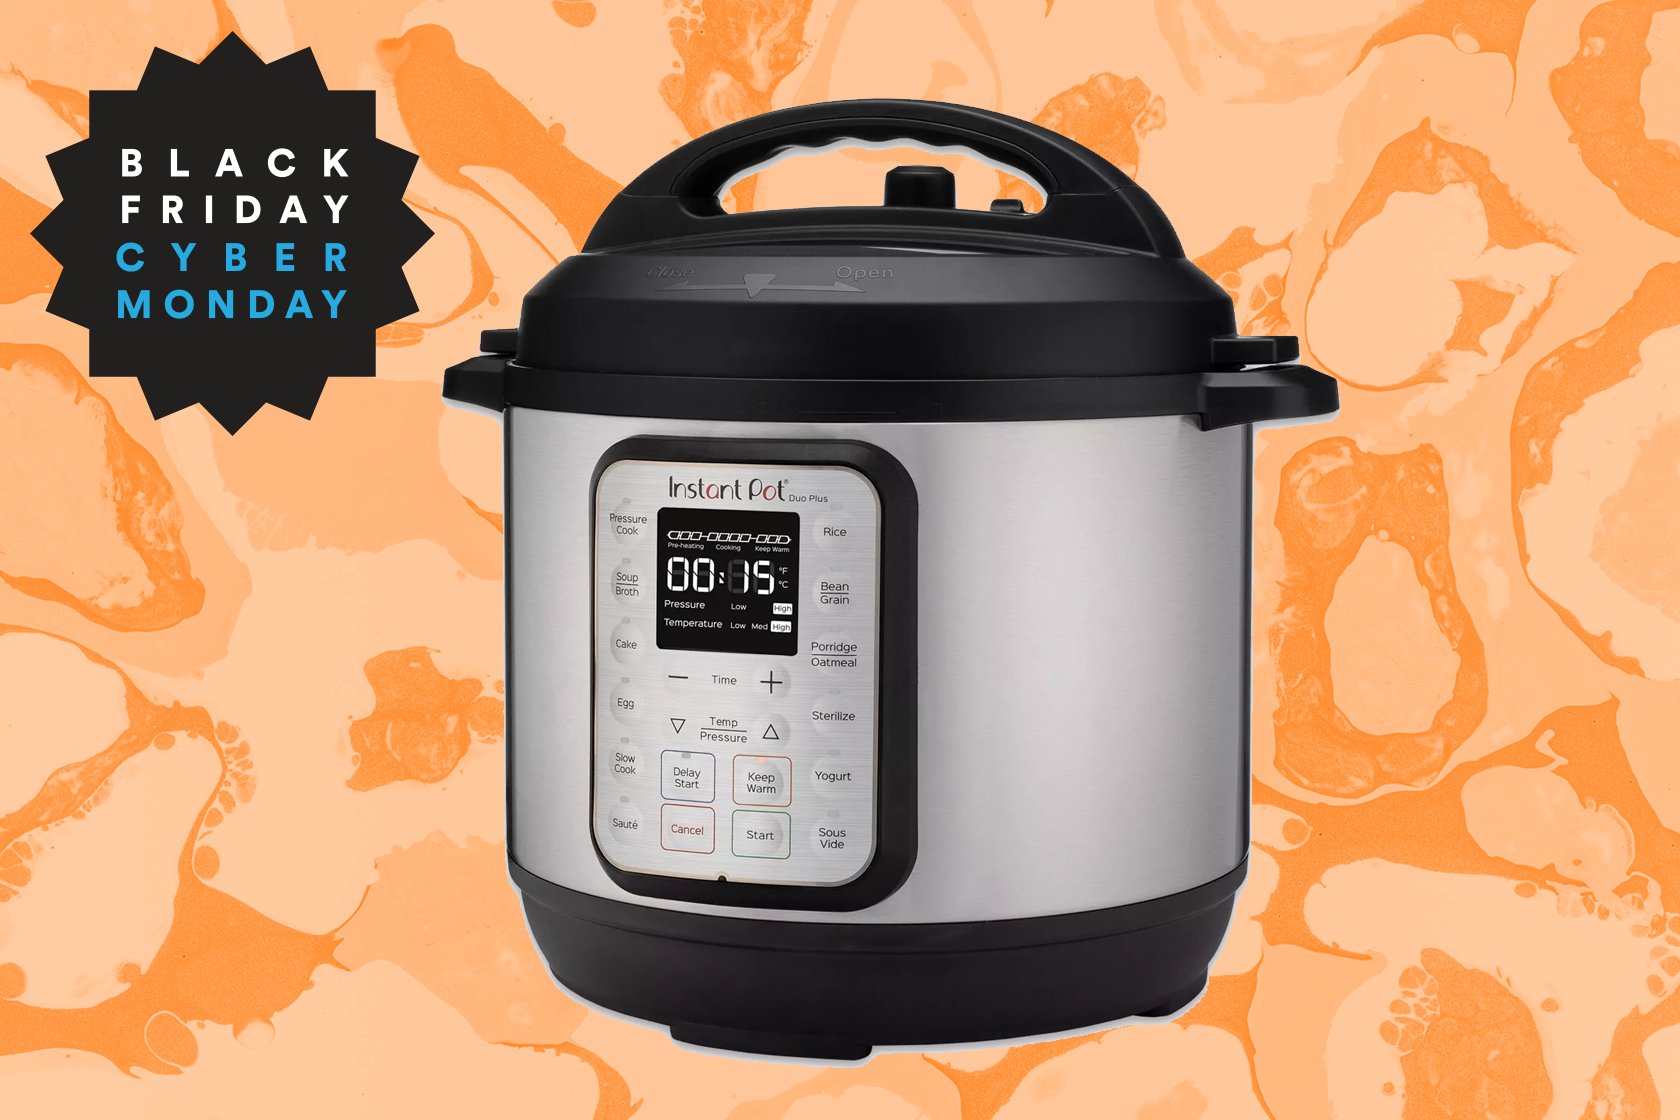 The 9-in-1 Instant Pot You've Been Eyeing Is 60 Percent off on